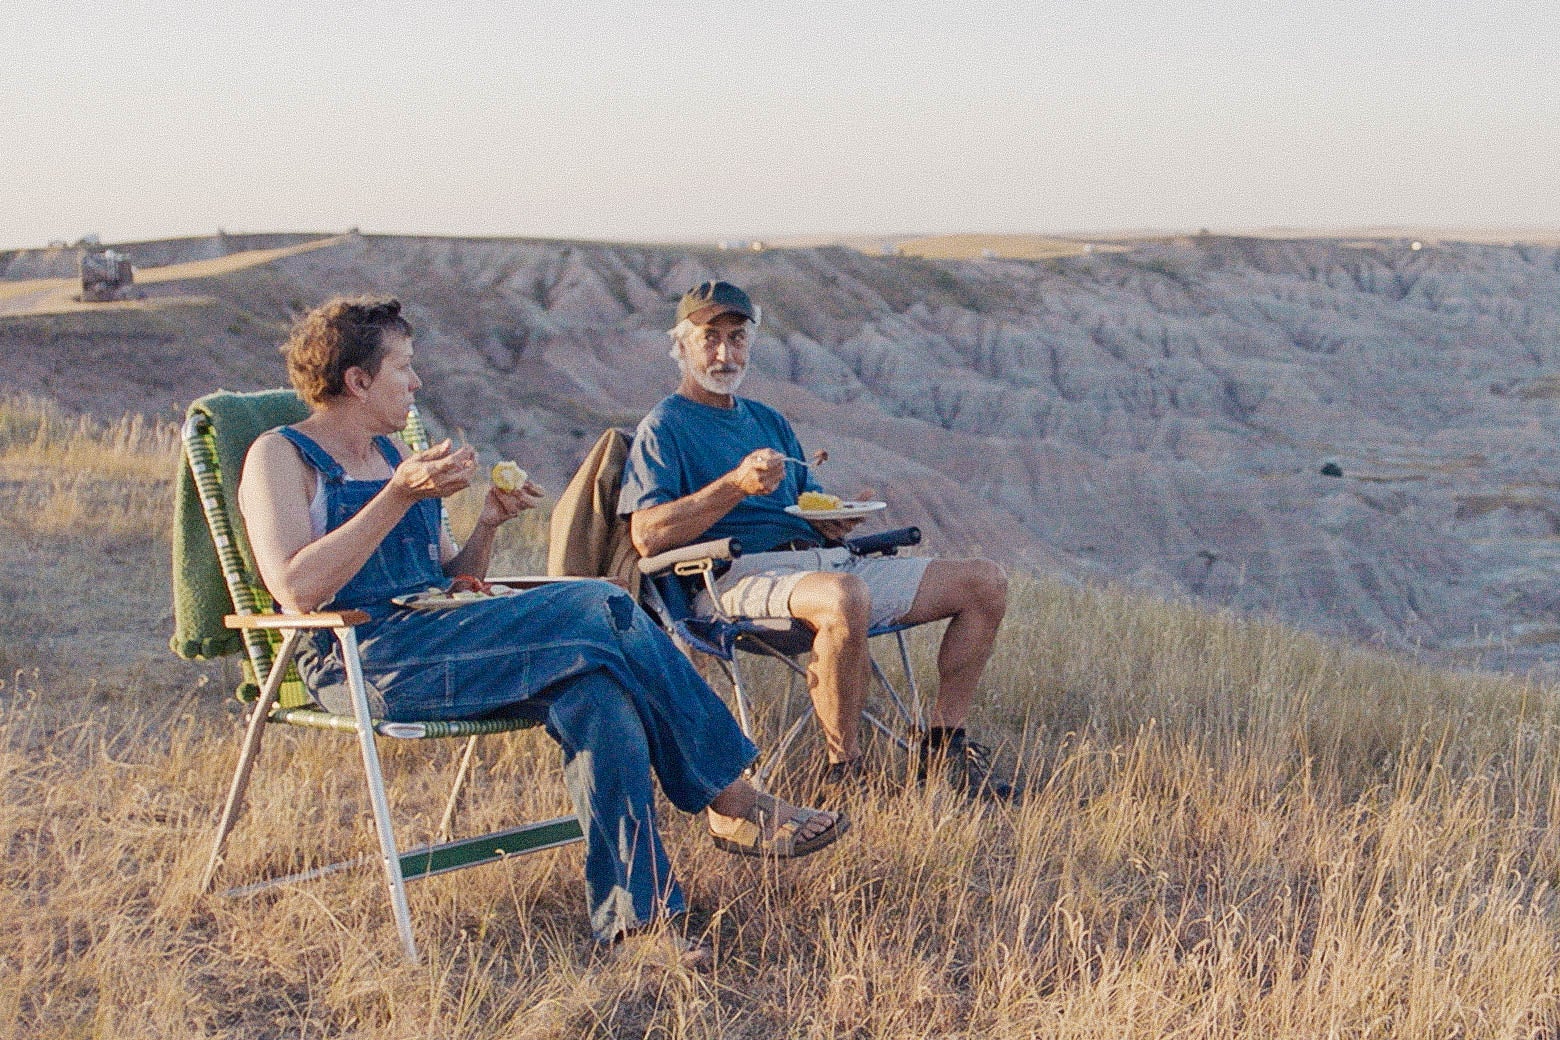 A still from Nomadland: Frances McDormand as Fern and David Strathairn as Dave sit on lawn chairs in front of a scenic backdrop.